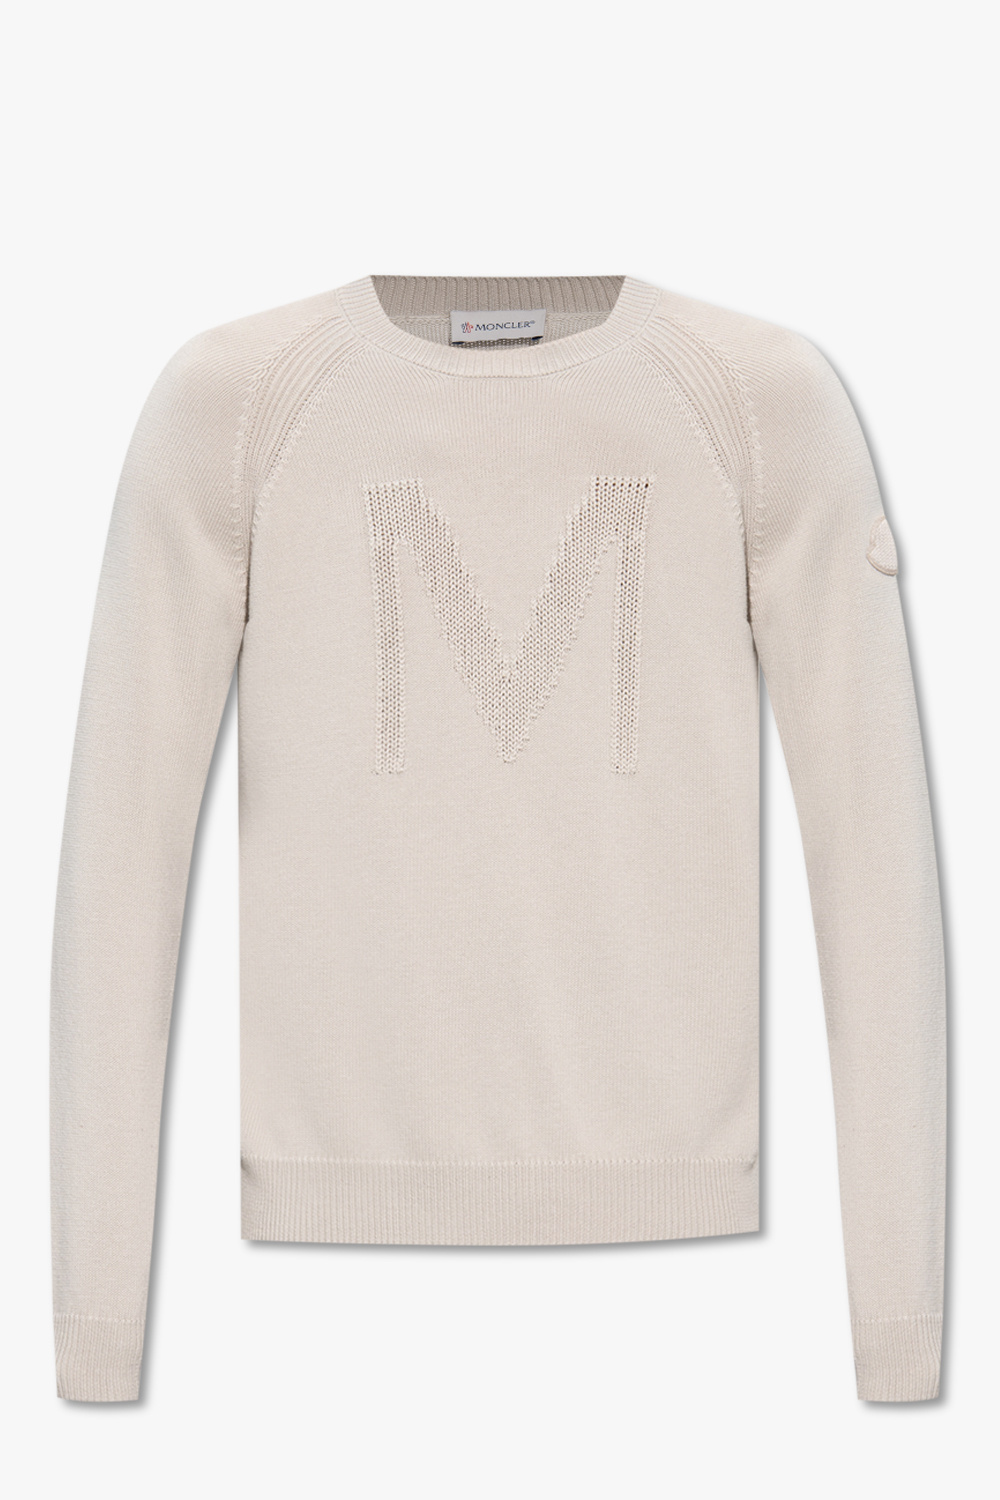 Moncler Sweater with logo